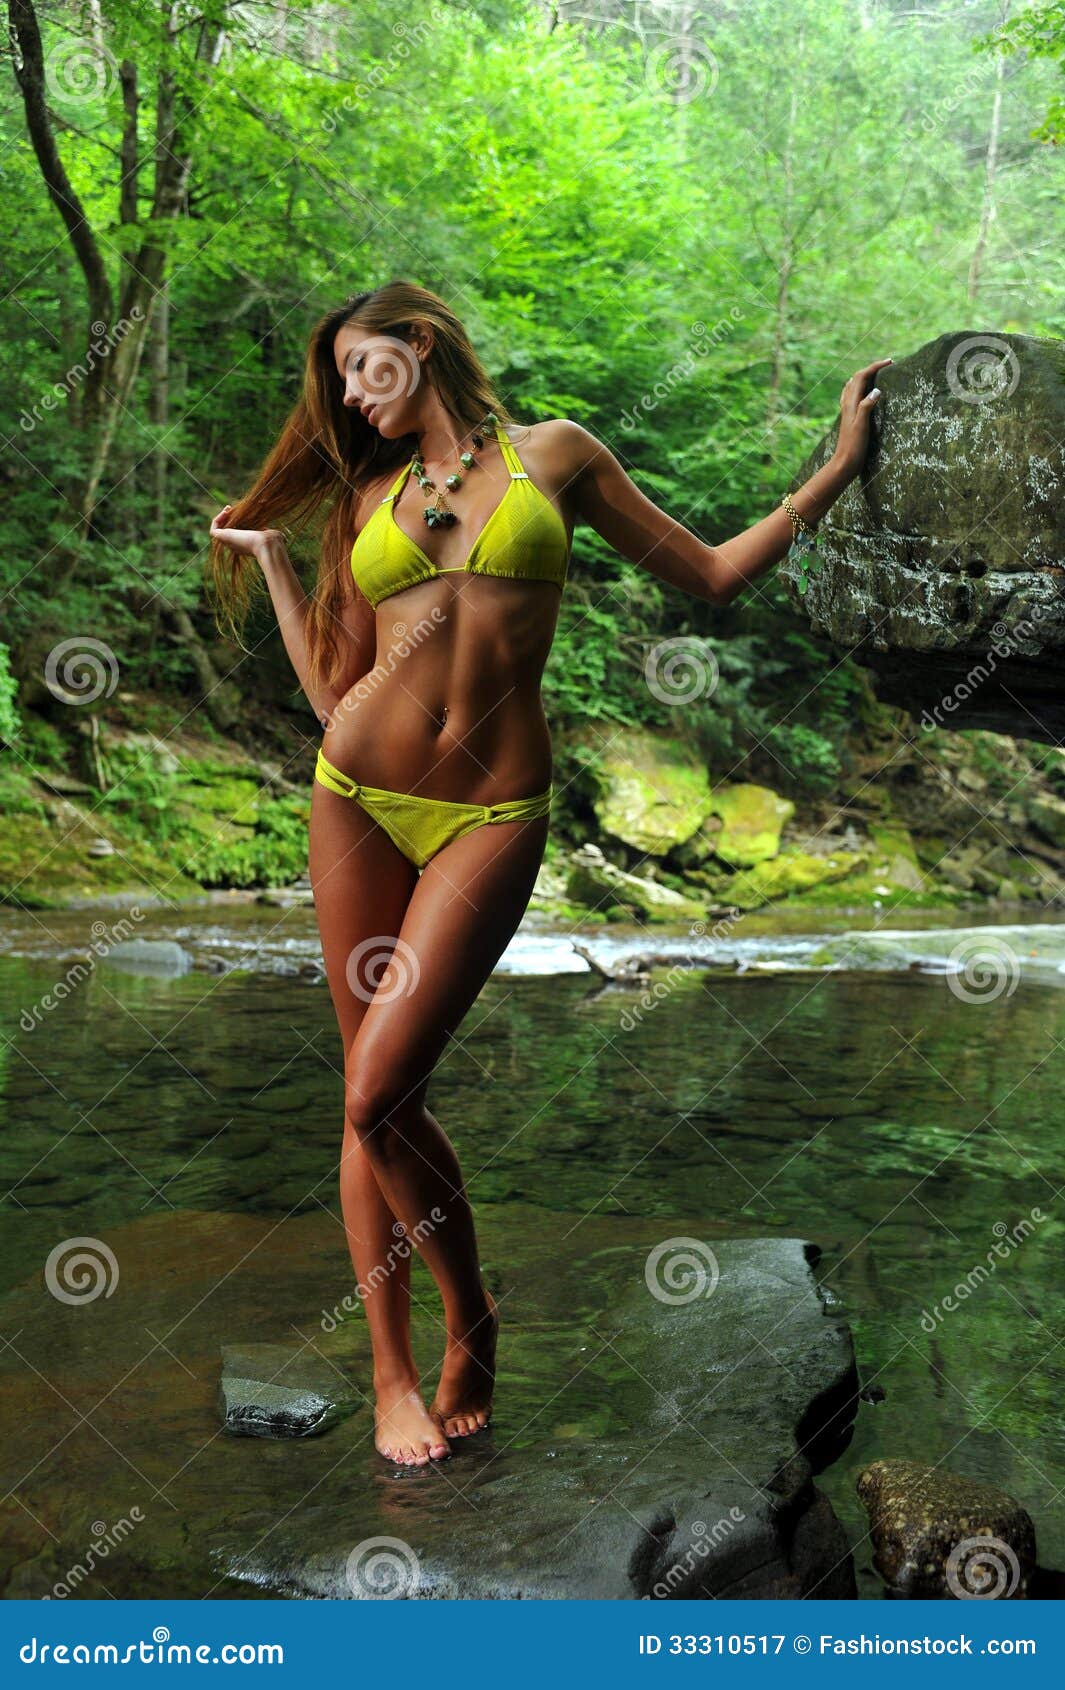 forfatter synet Spædbarn Young Woman Posing in Designer Bikini at Exotic Location of Mountain River  Stock Image - Image of exotic, breasts: 33310517